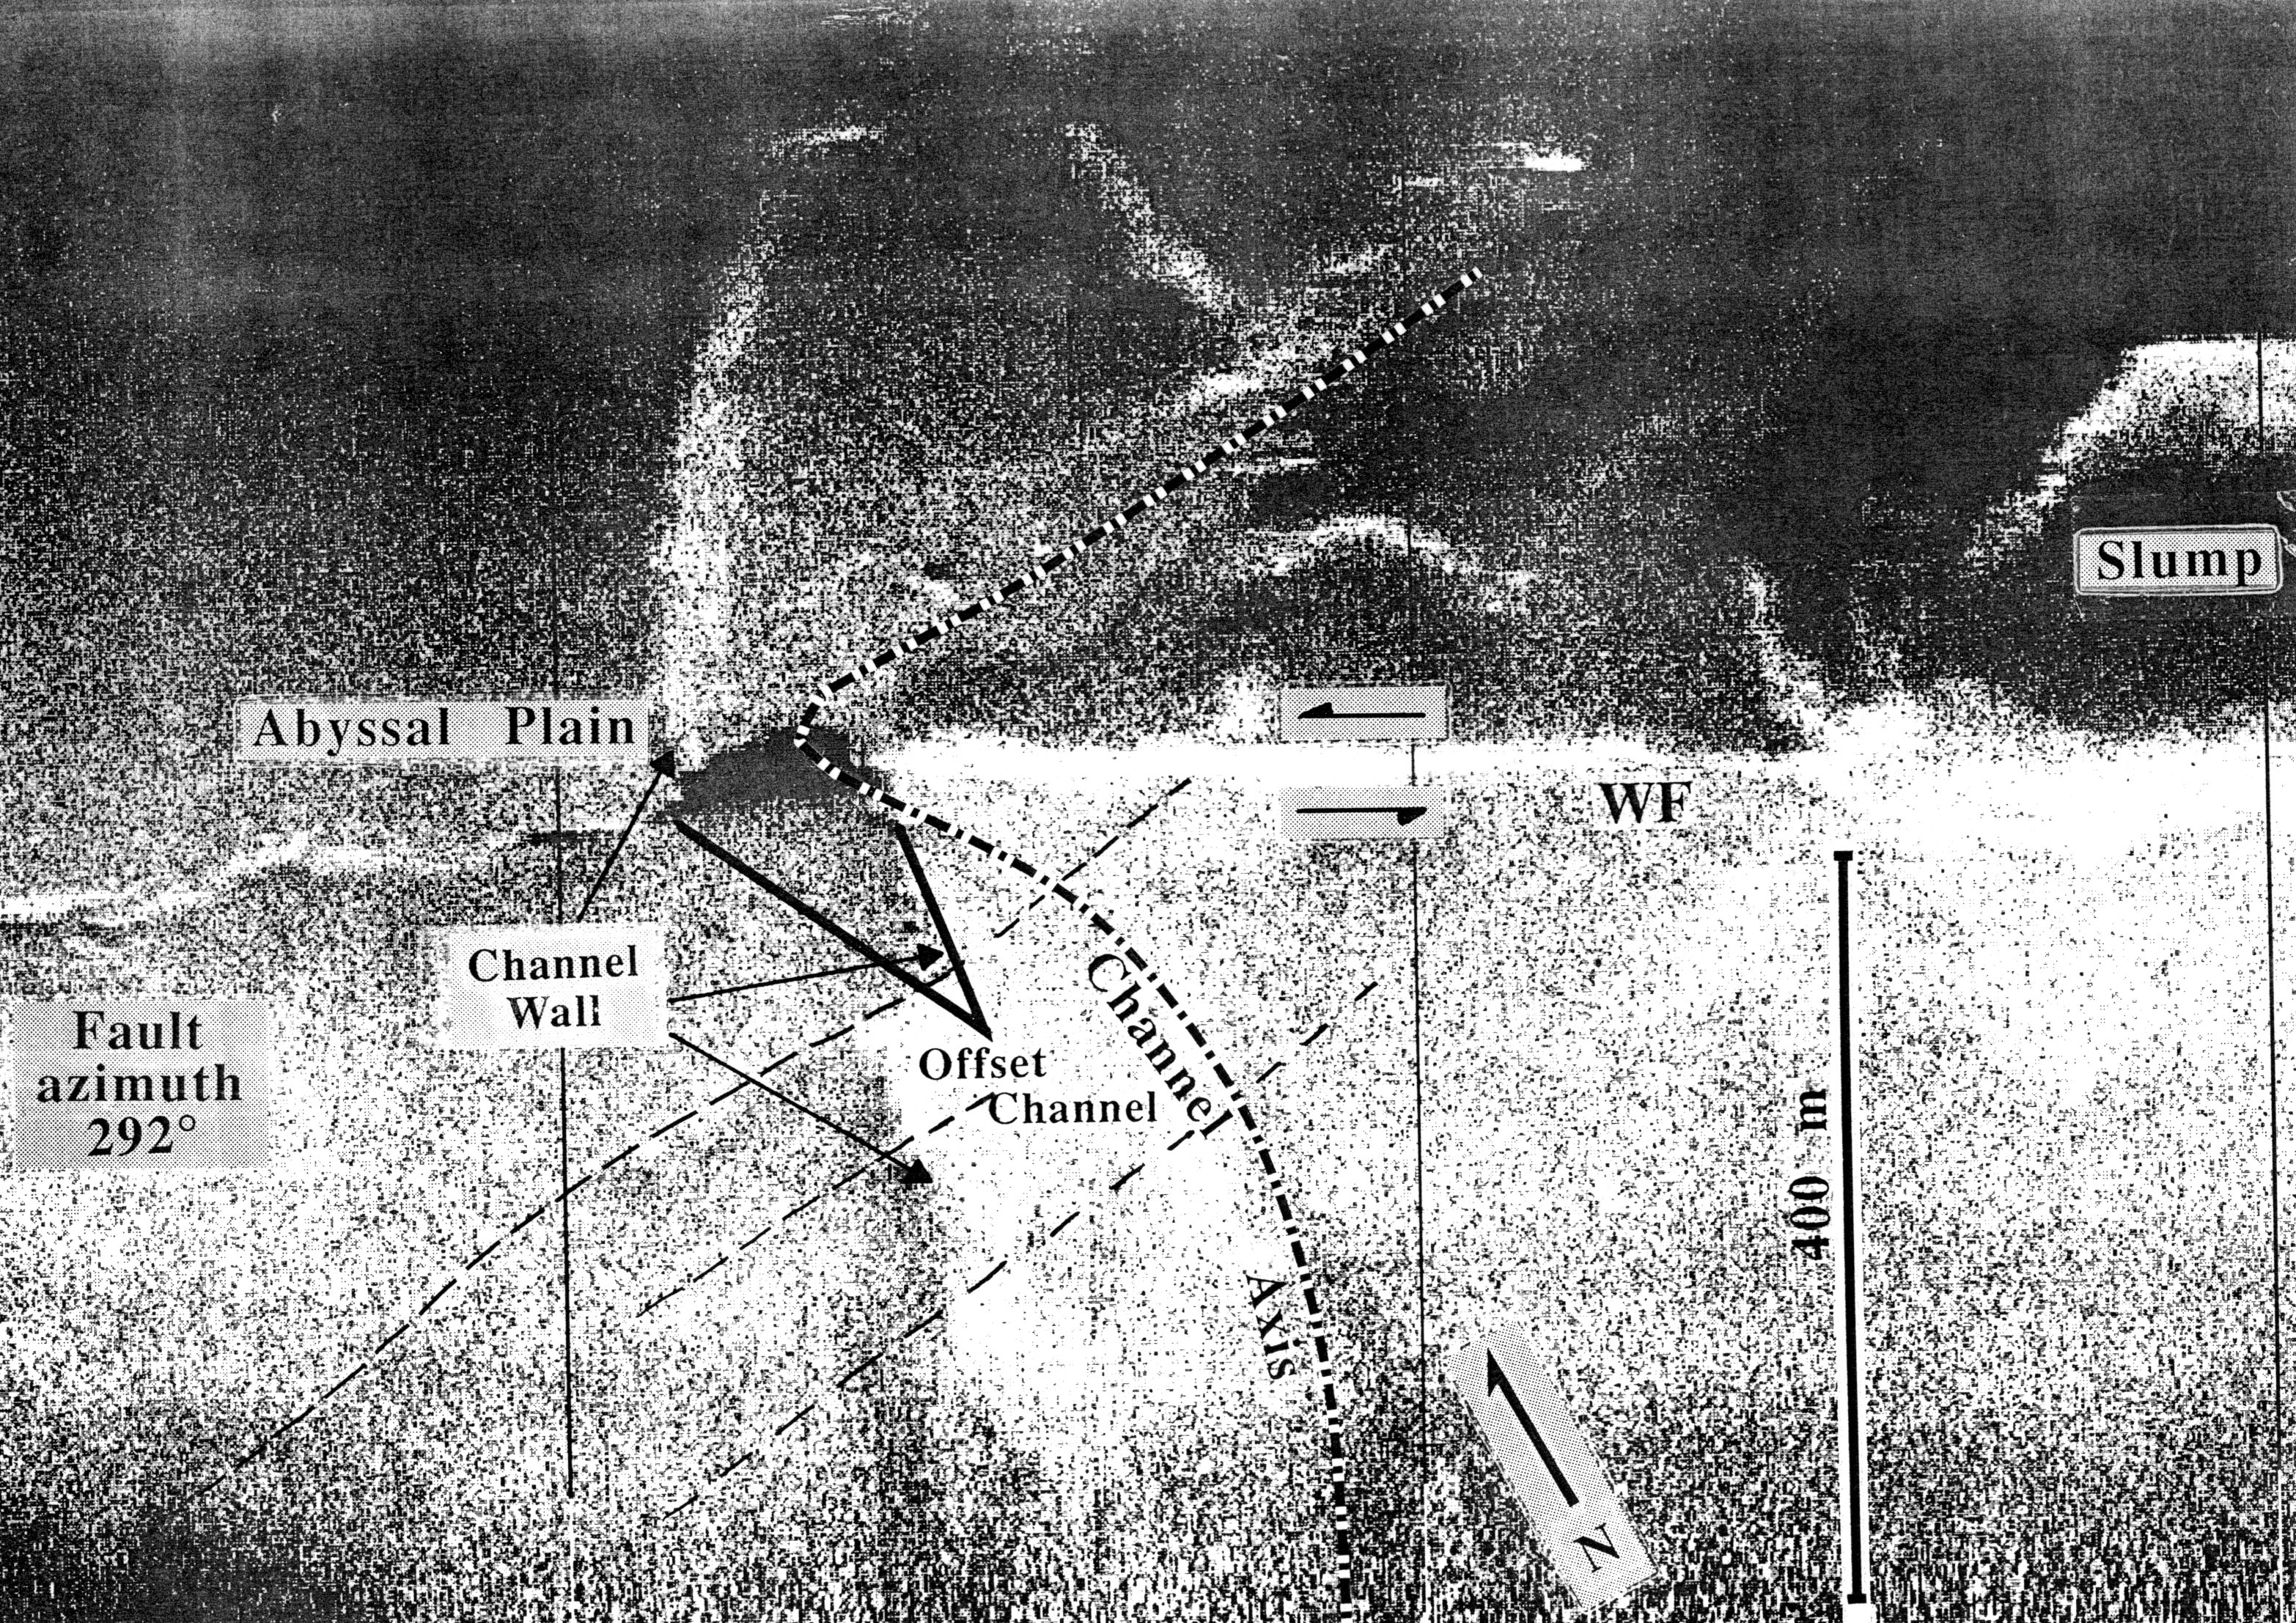 Elvis image, marking point of discovery of the Wecoma Fault, which offsets a deep-sea channel about one hundred meters (more than three hundred feet)